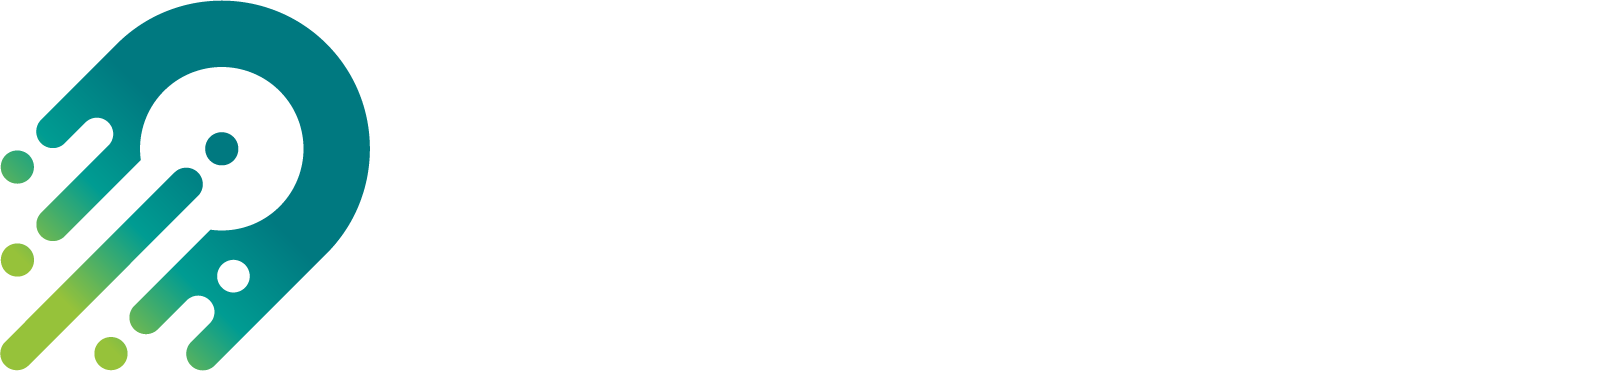 Orchestry_Full_Logo_White_Text